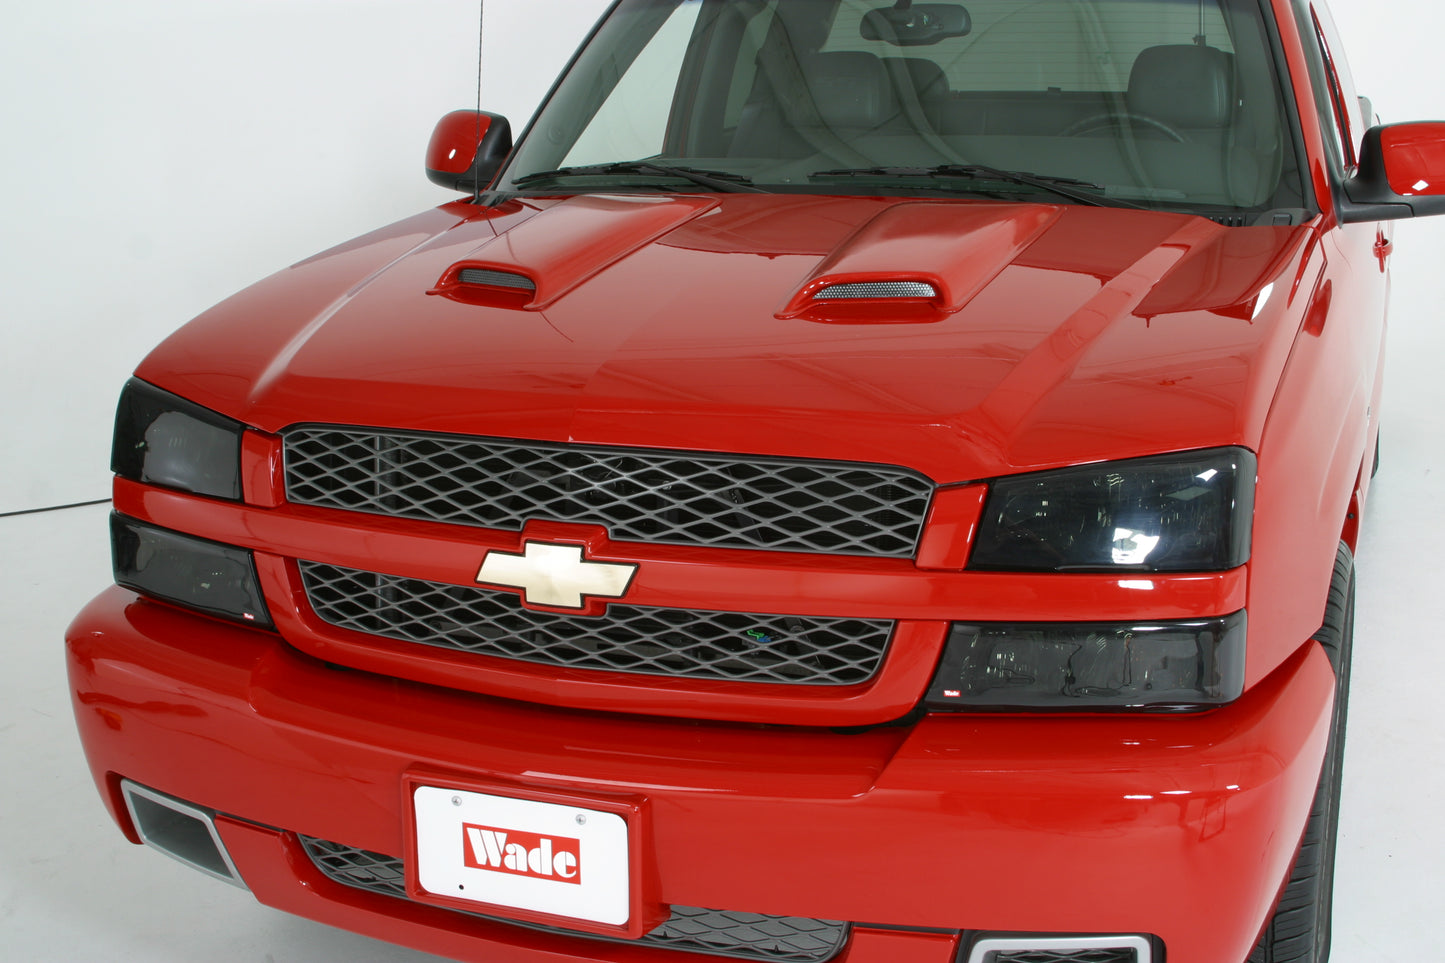 2001 Ford Mustang Head Light Covers